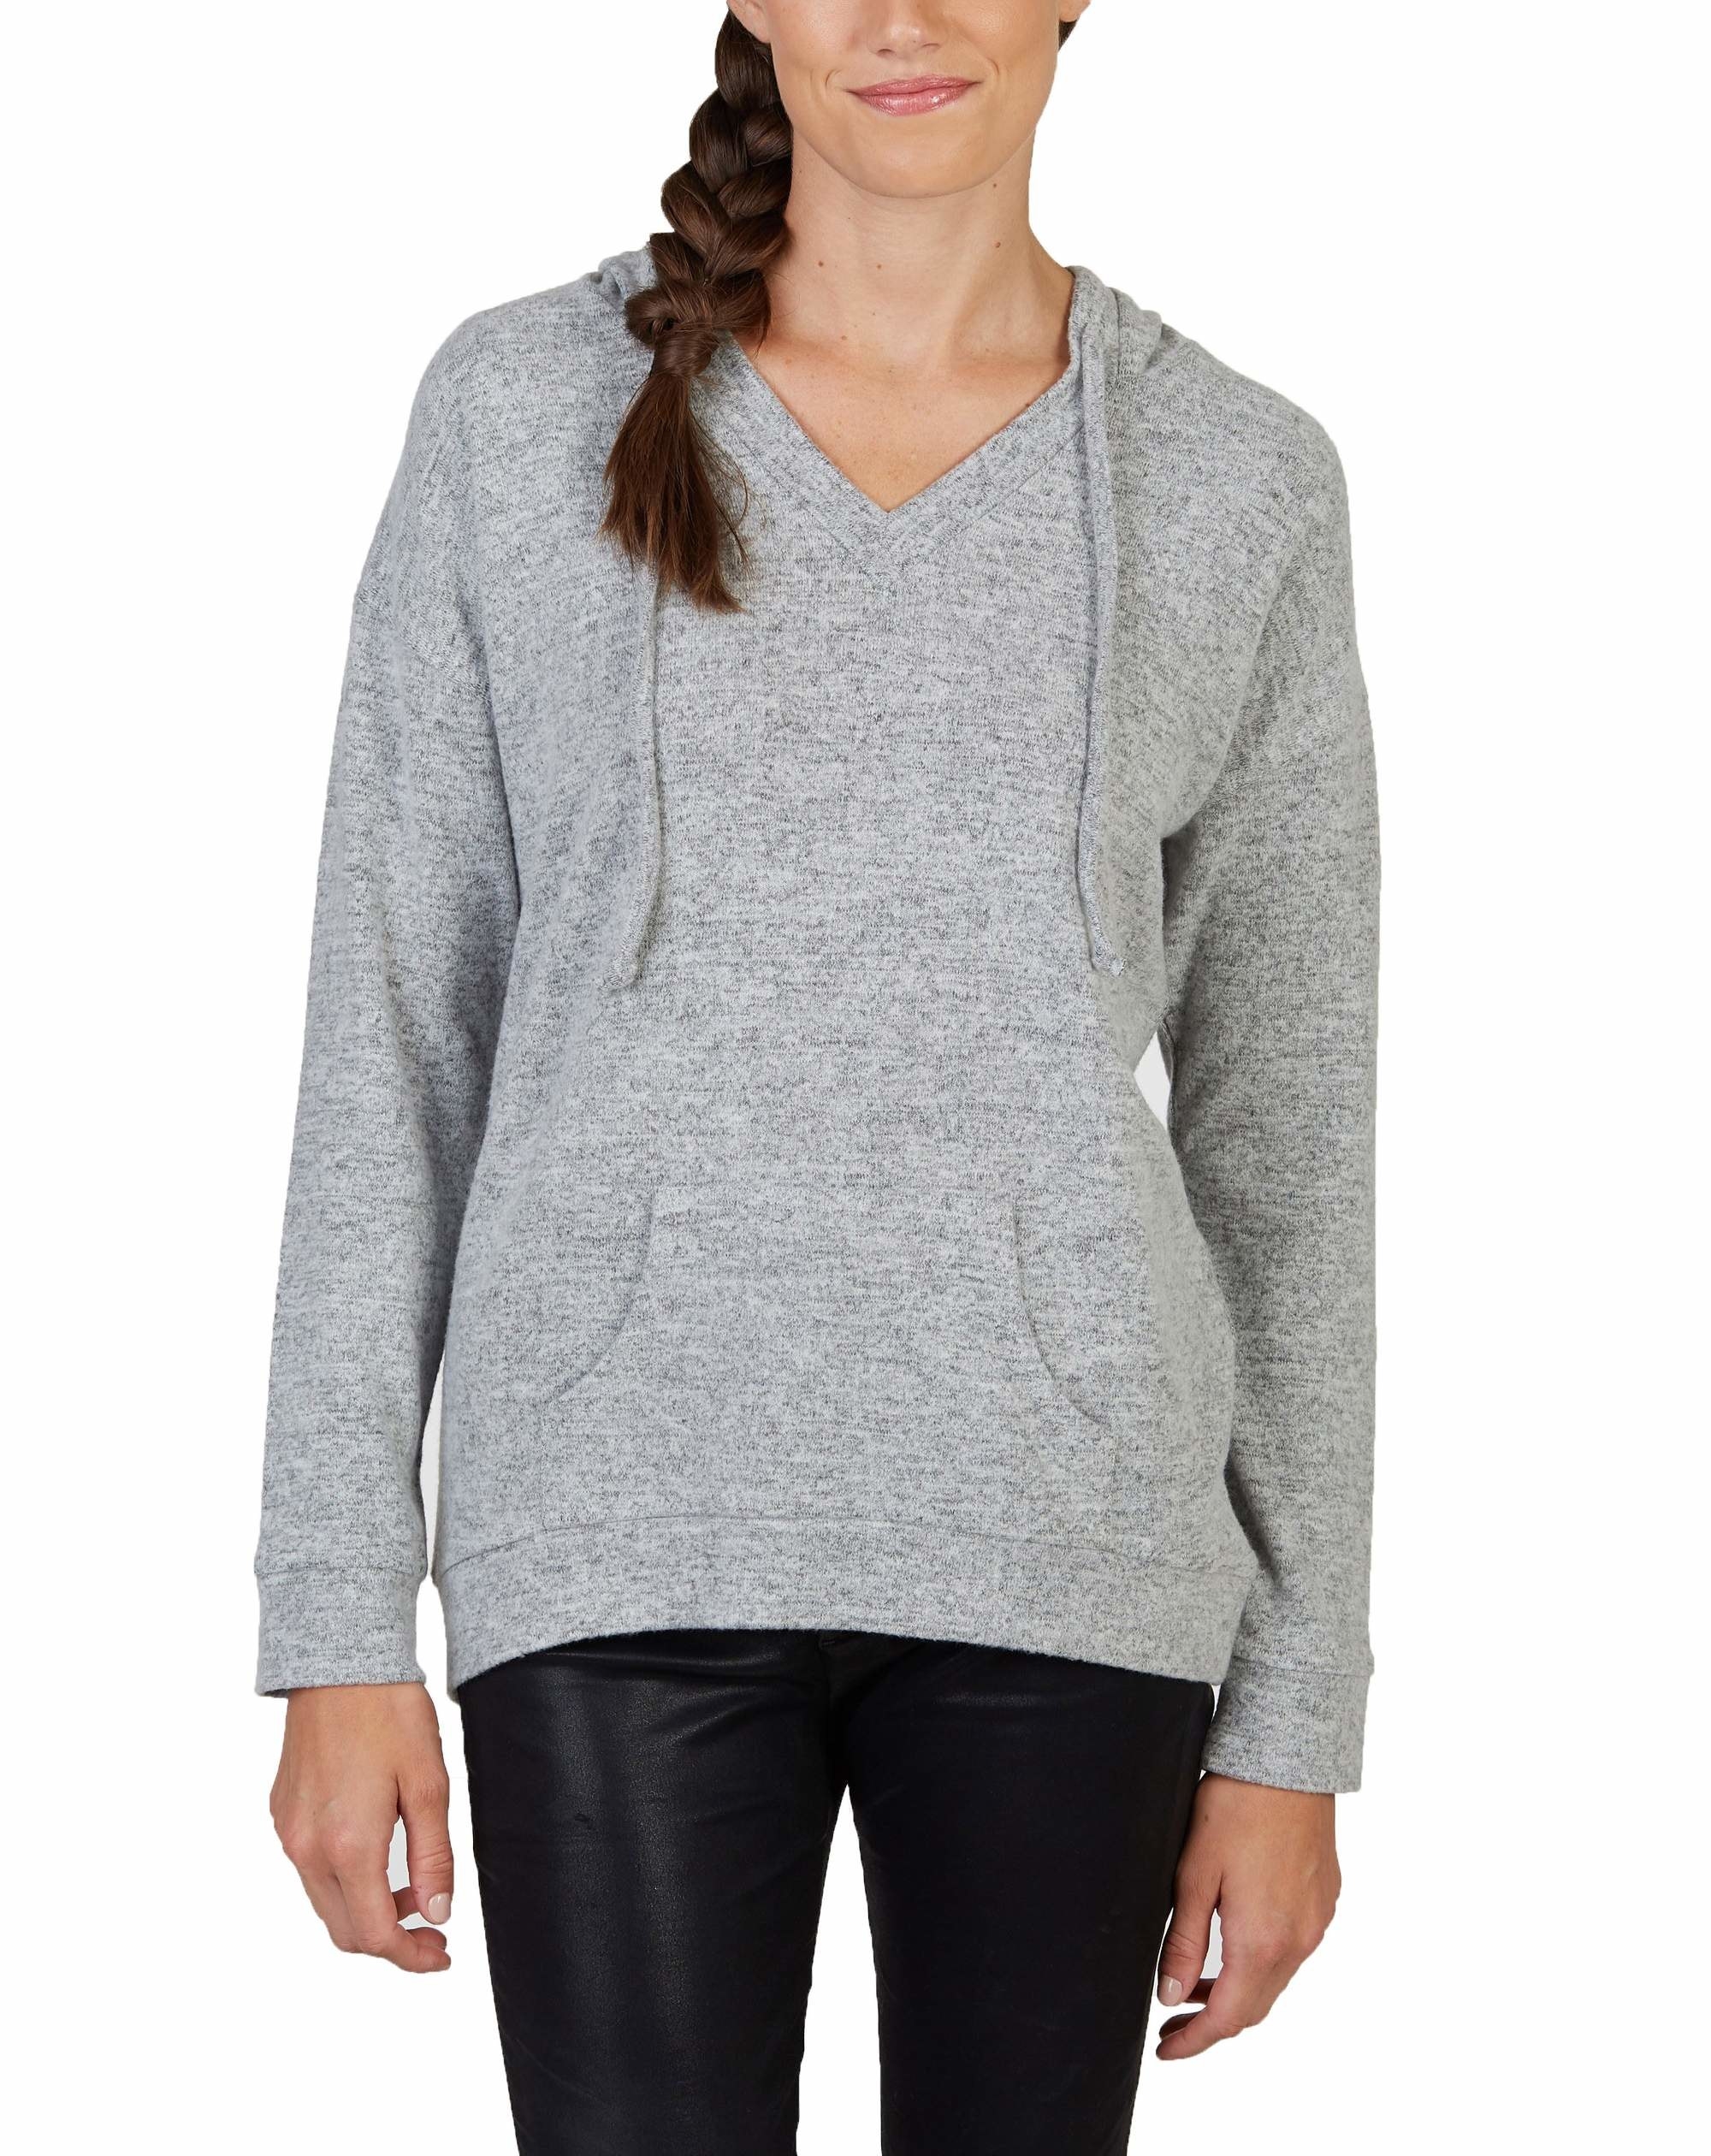 29 Sweaters From Walmart You May Want To Add To Your Fall Wardrobe